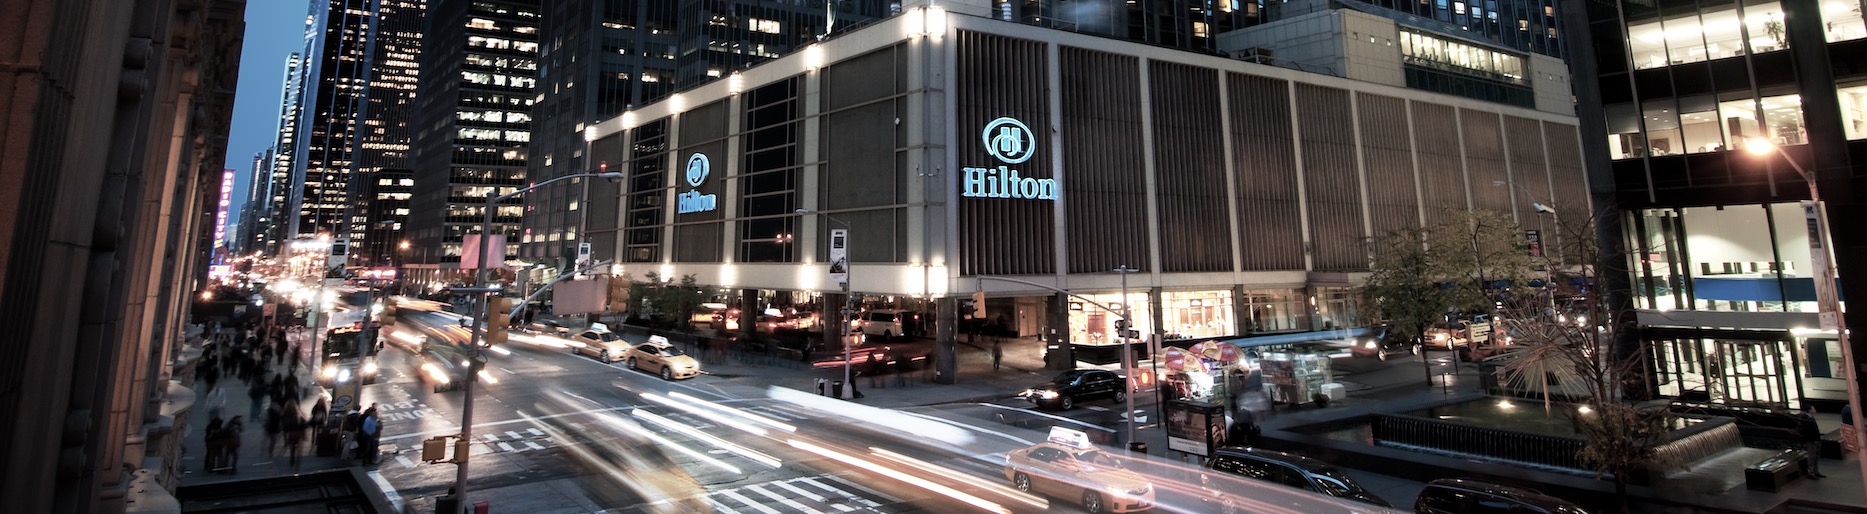 Flagship Hilton hotel in times square at night time with traffic on street 